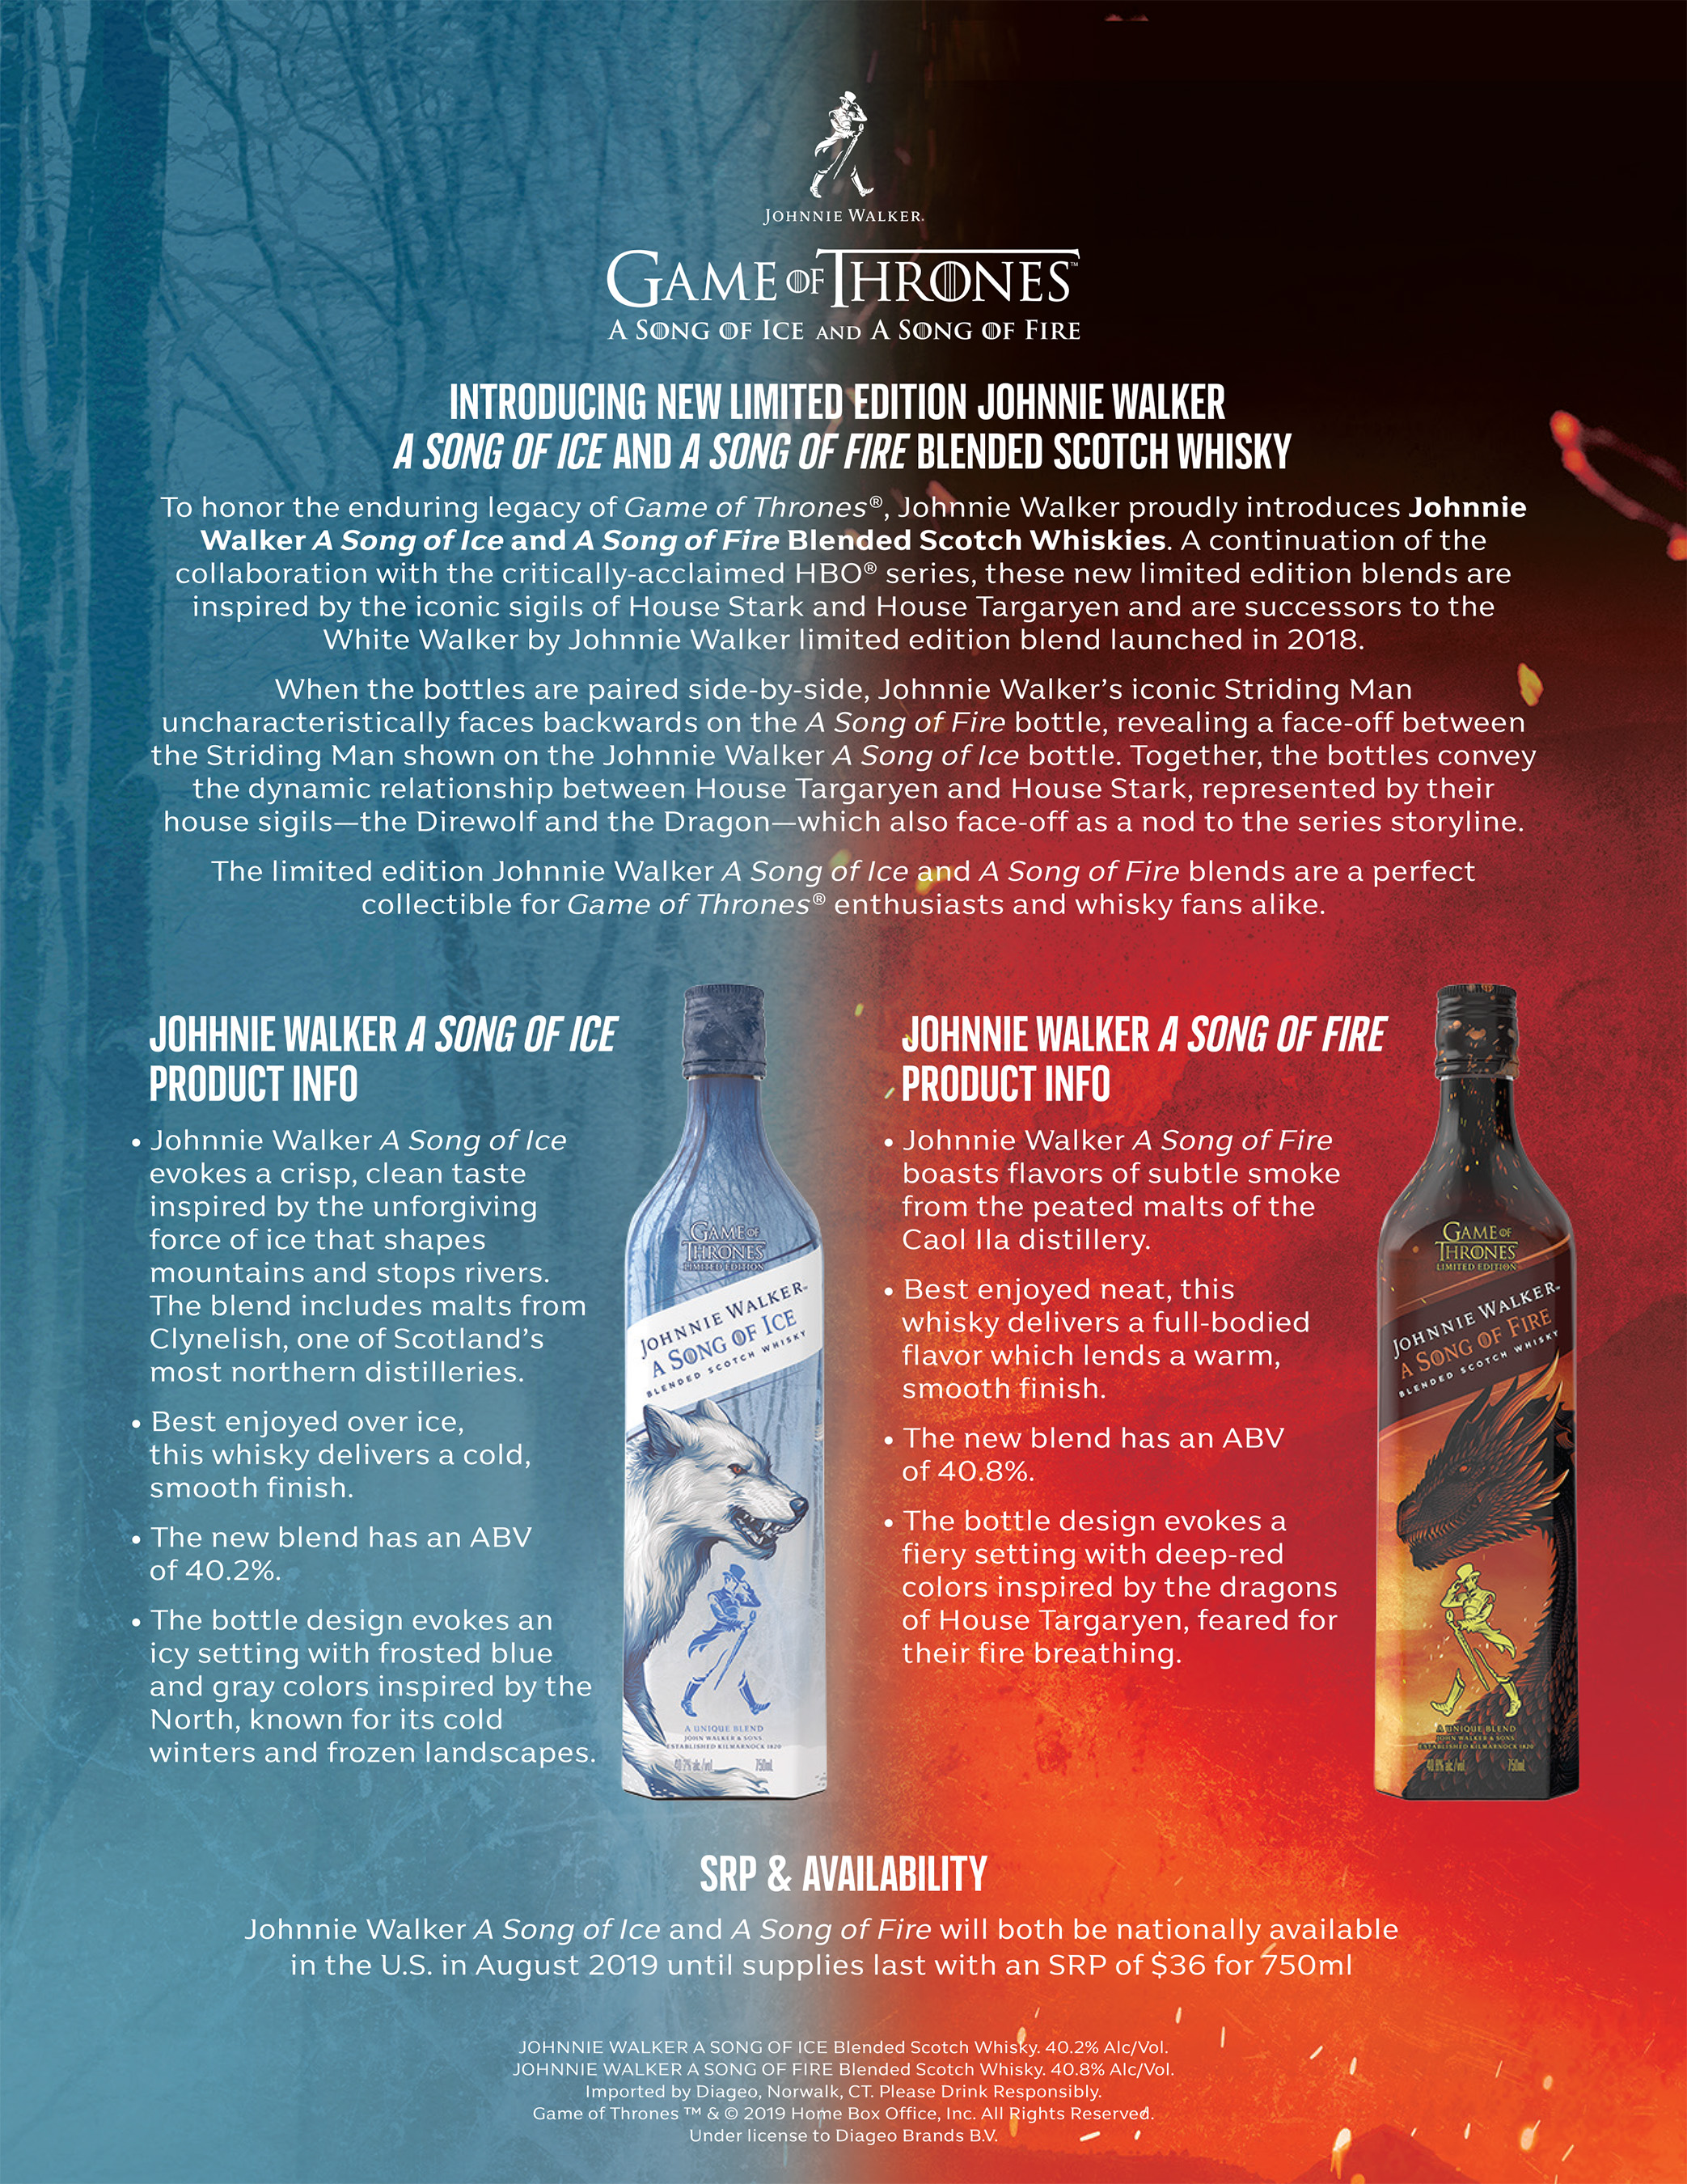 Learn more about Johnnie Walker A Song of Ice and A Song of Fire.